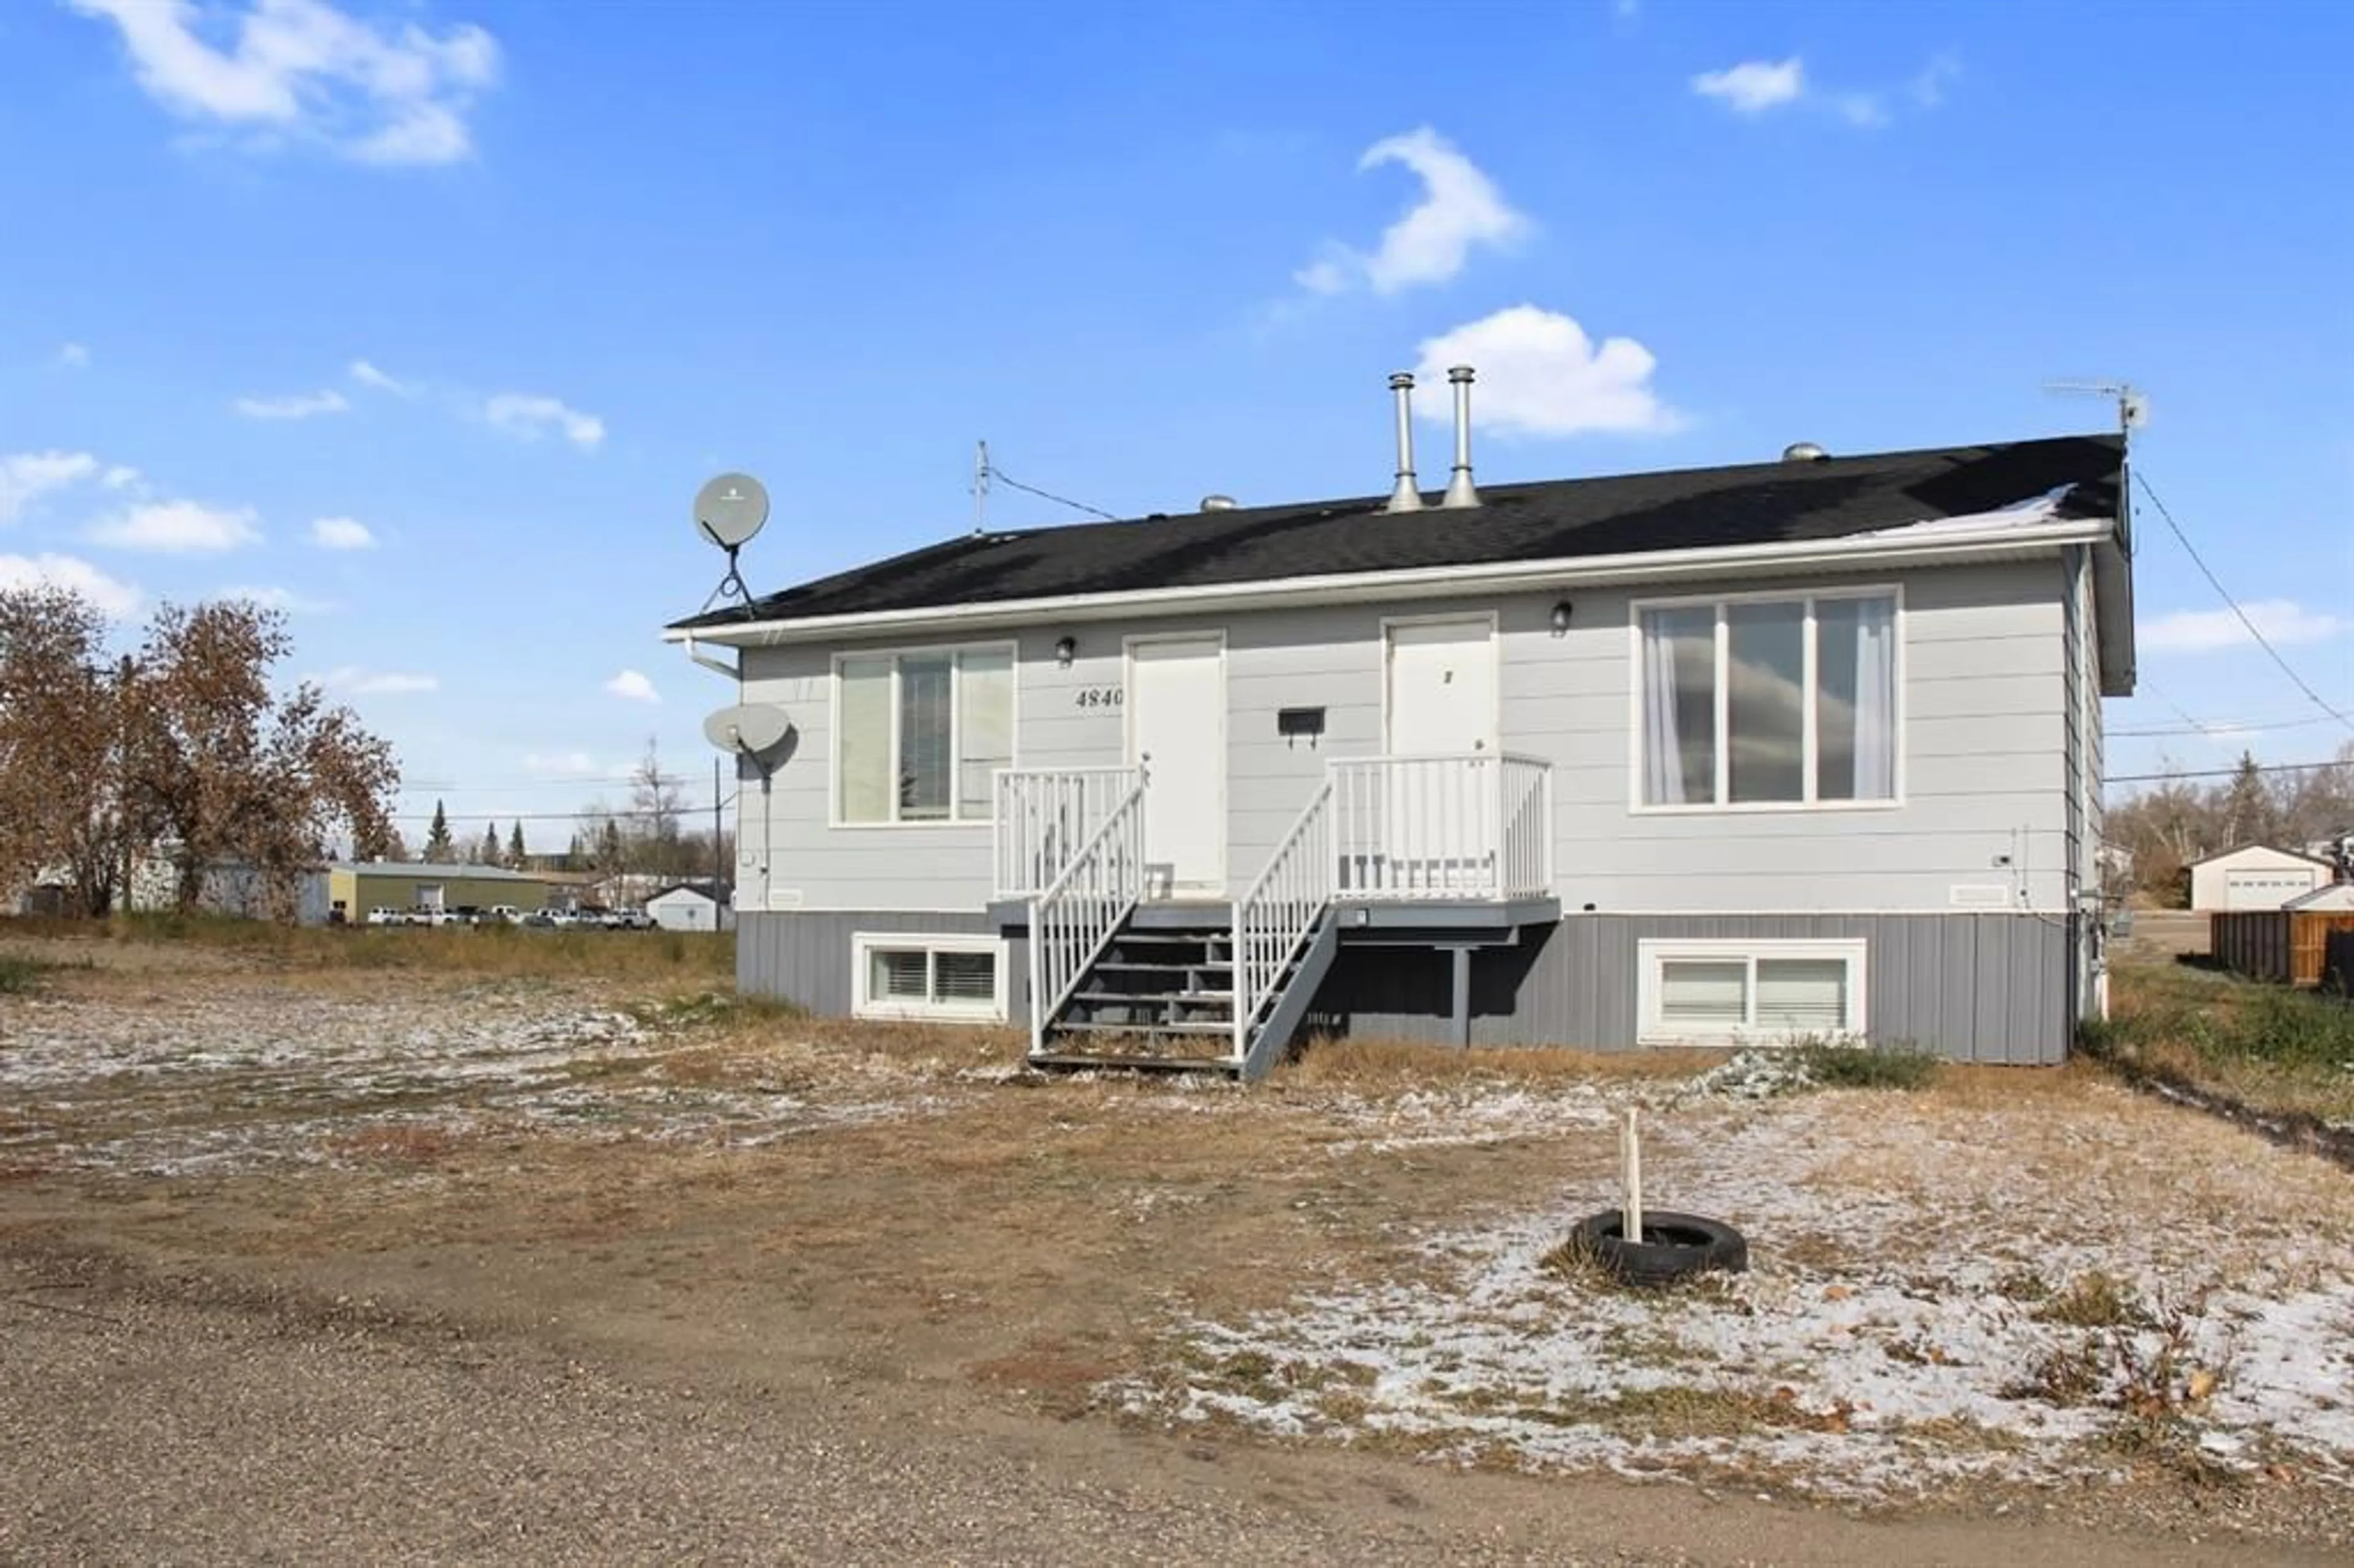 Frontside or backside of a home for 4840 49 Ave, Irma Alberta T0B 2H0